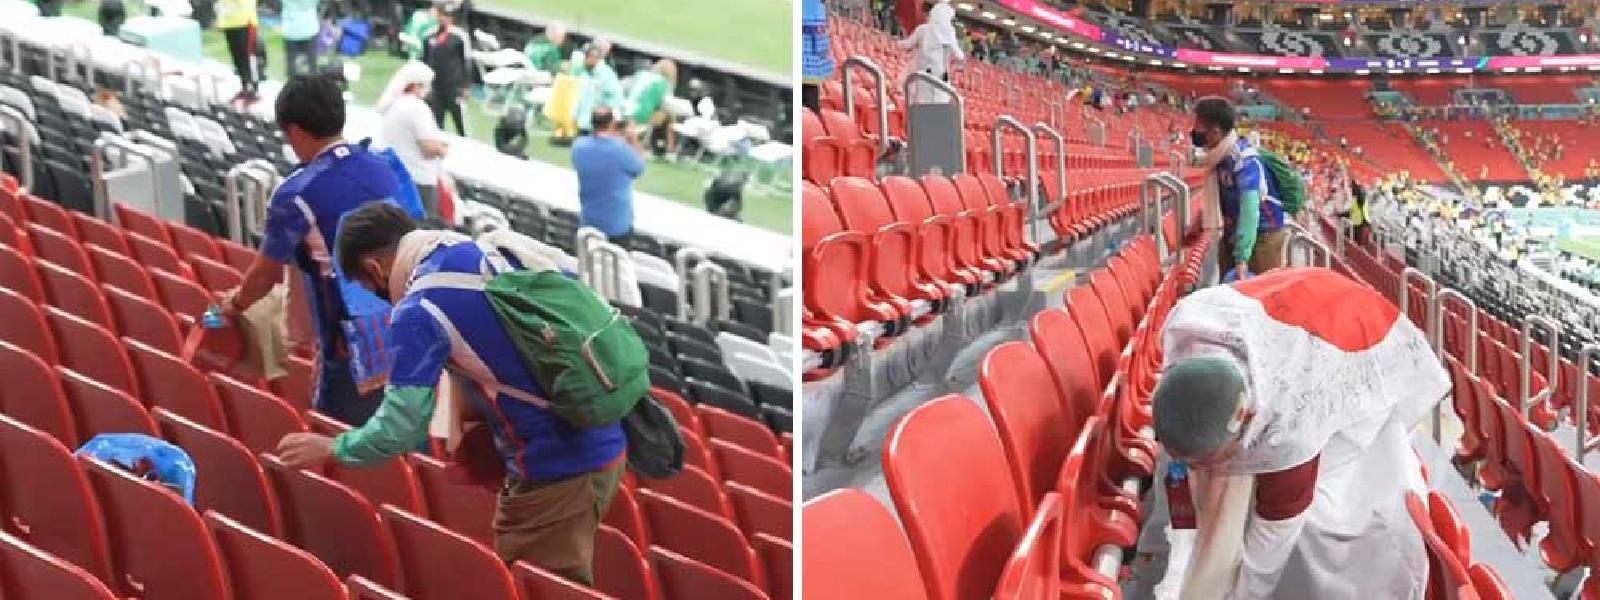 FIFA World Cup: Japanese fans clean stadium